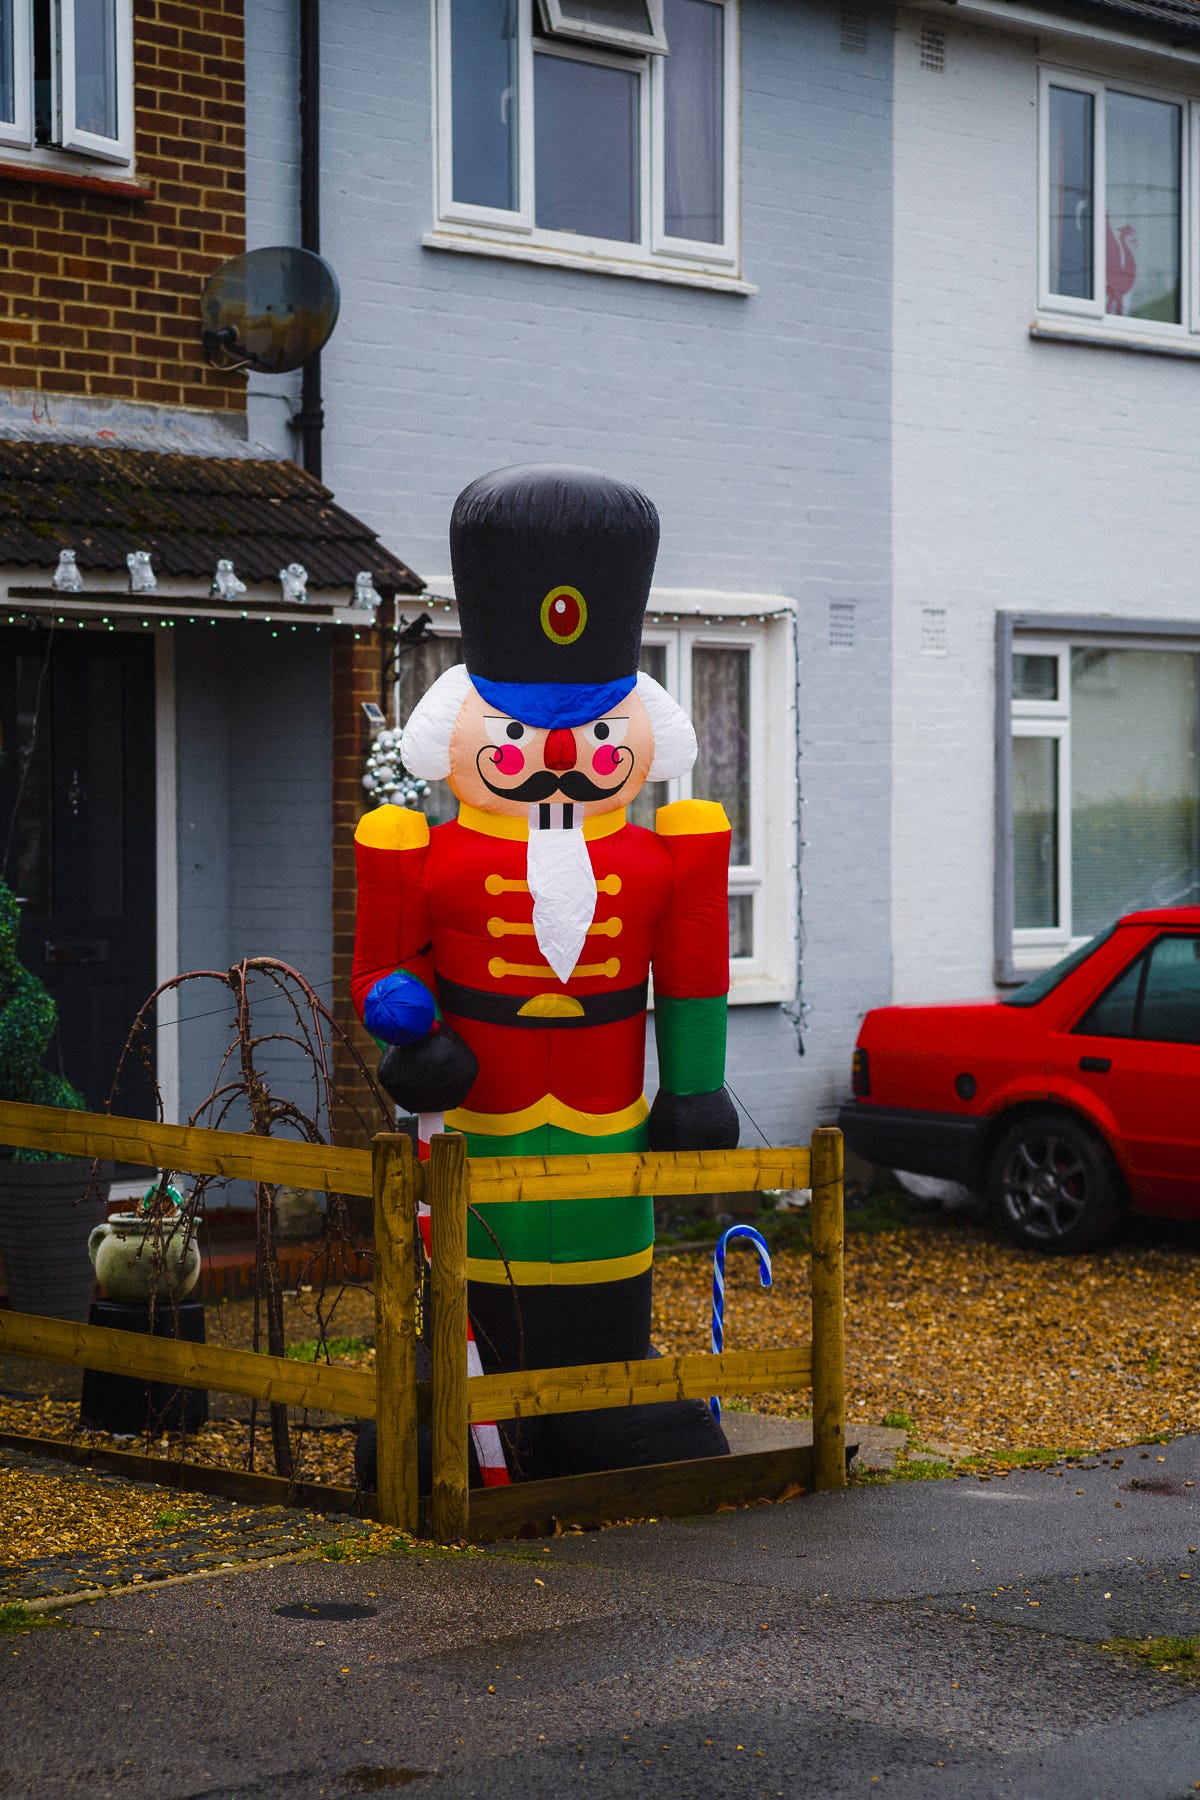 Inflatable nutcracker toy solider figure outside a suburban semi-detached house